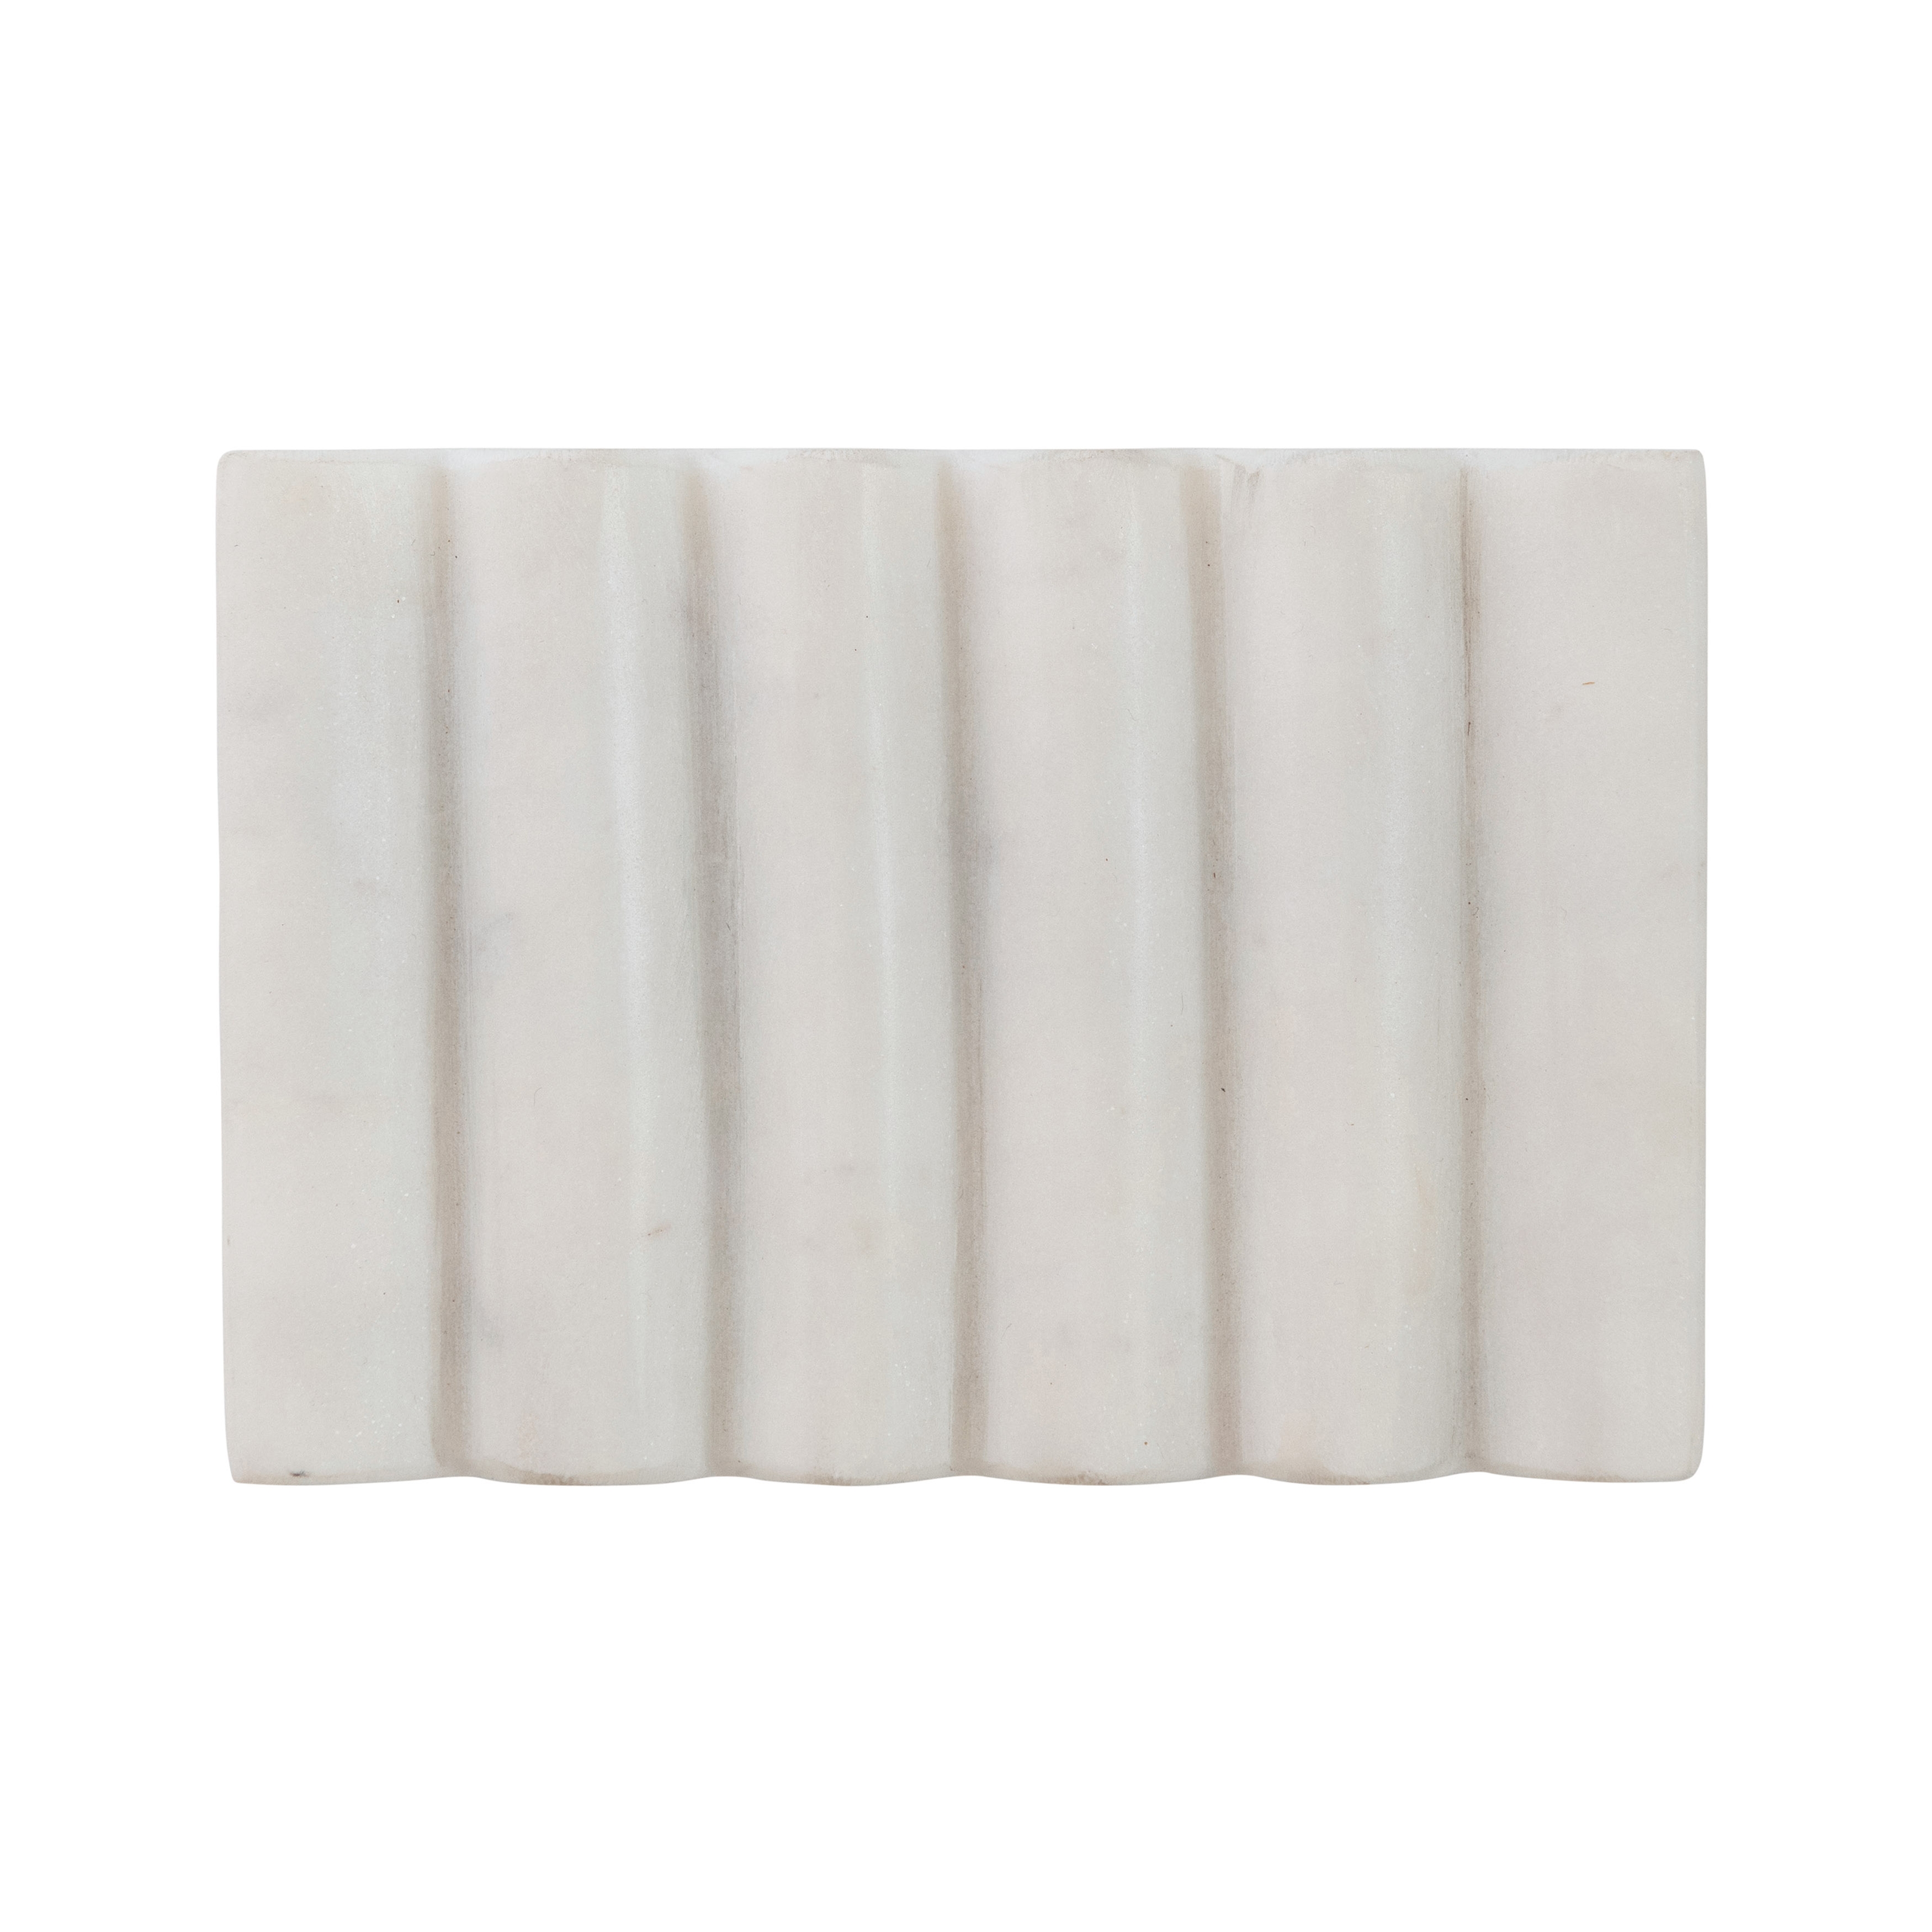 Contemporary Carved Marble Soap Dish for Bathrooms - Image 0